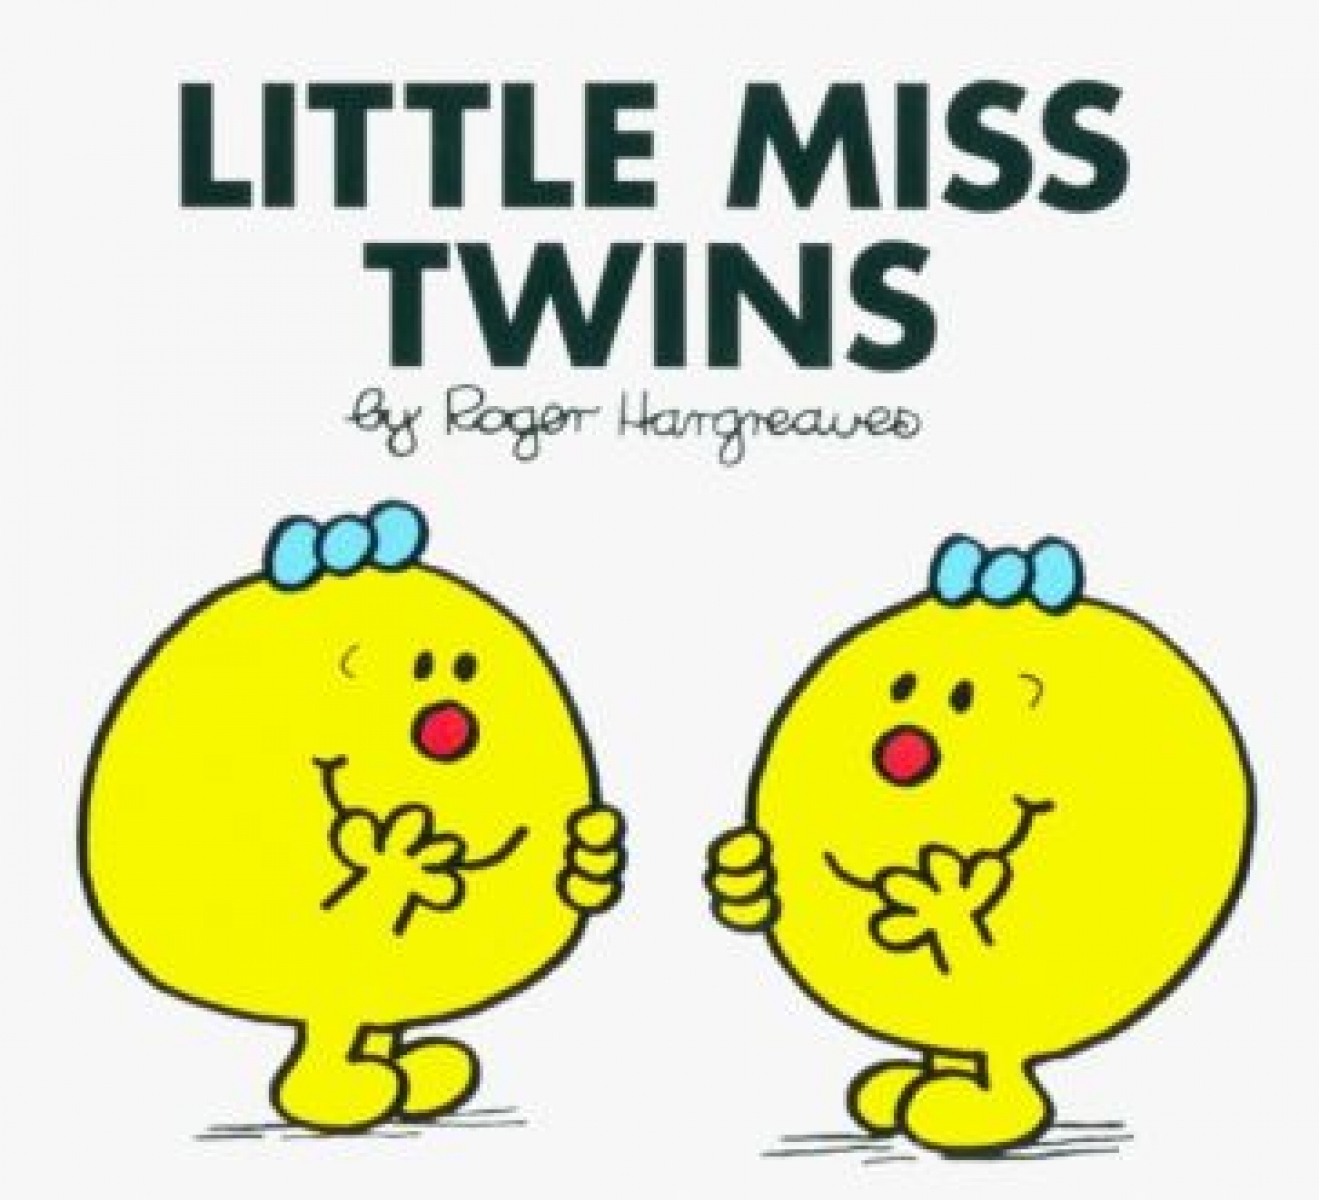 Hargreaves Roger Little Miss Twins 